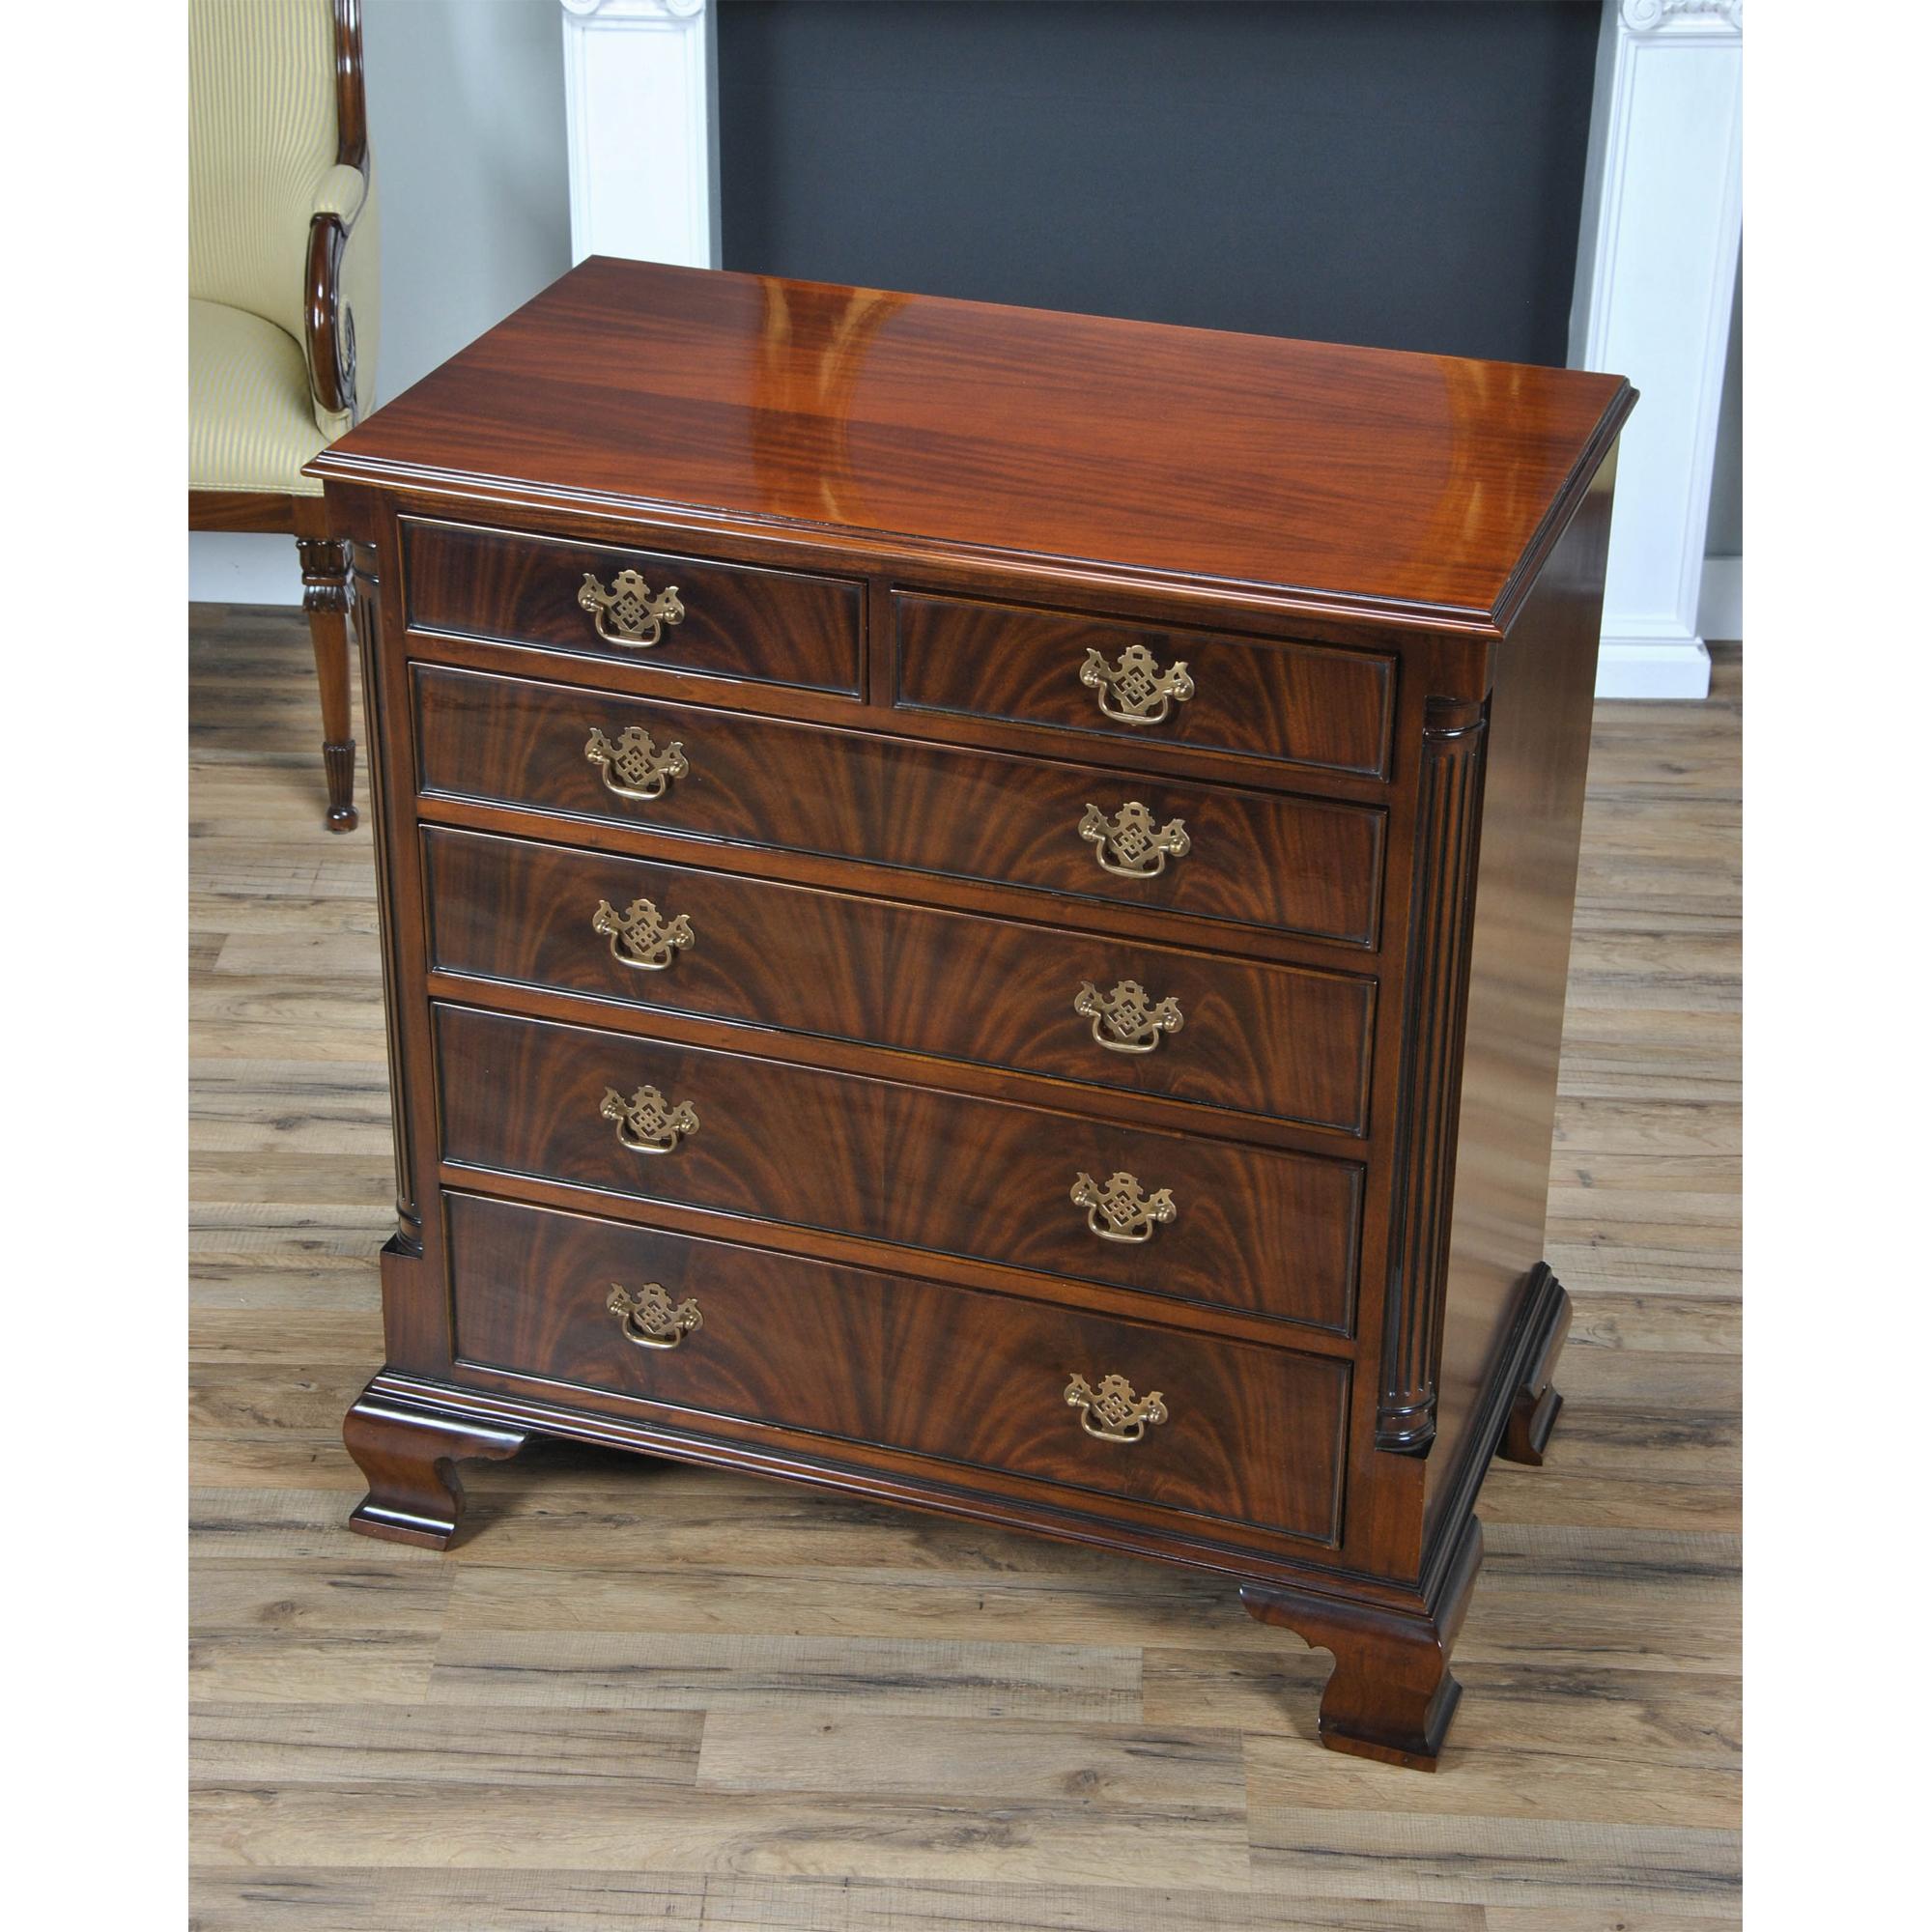 A high quality reproduction Mahogany Chest which features superb detailing with beading around its four graduated drawers and two uppermost drawers, graceful solid brass  drawer pulls, delicately fluted quarter columns and well proportioned bracket